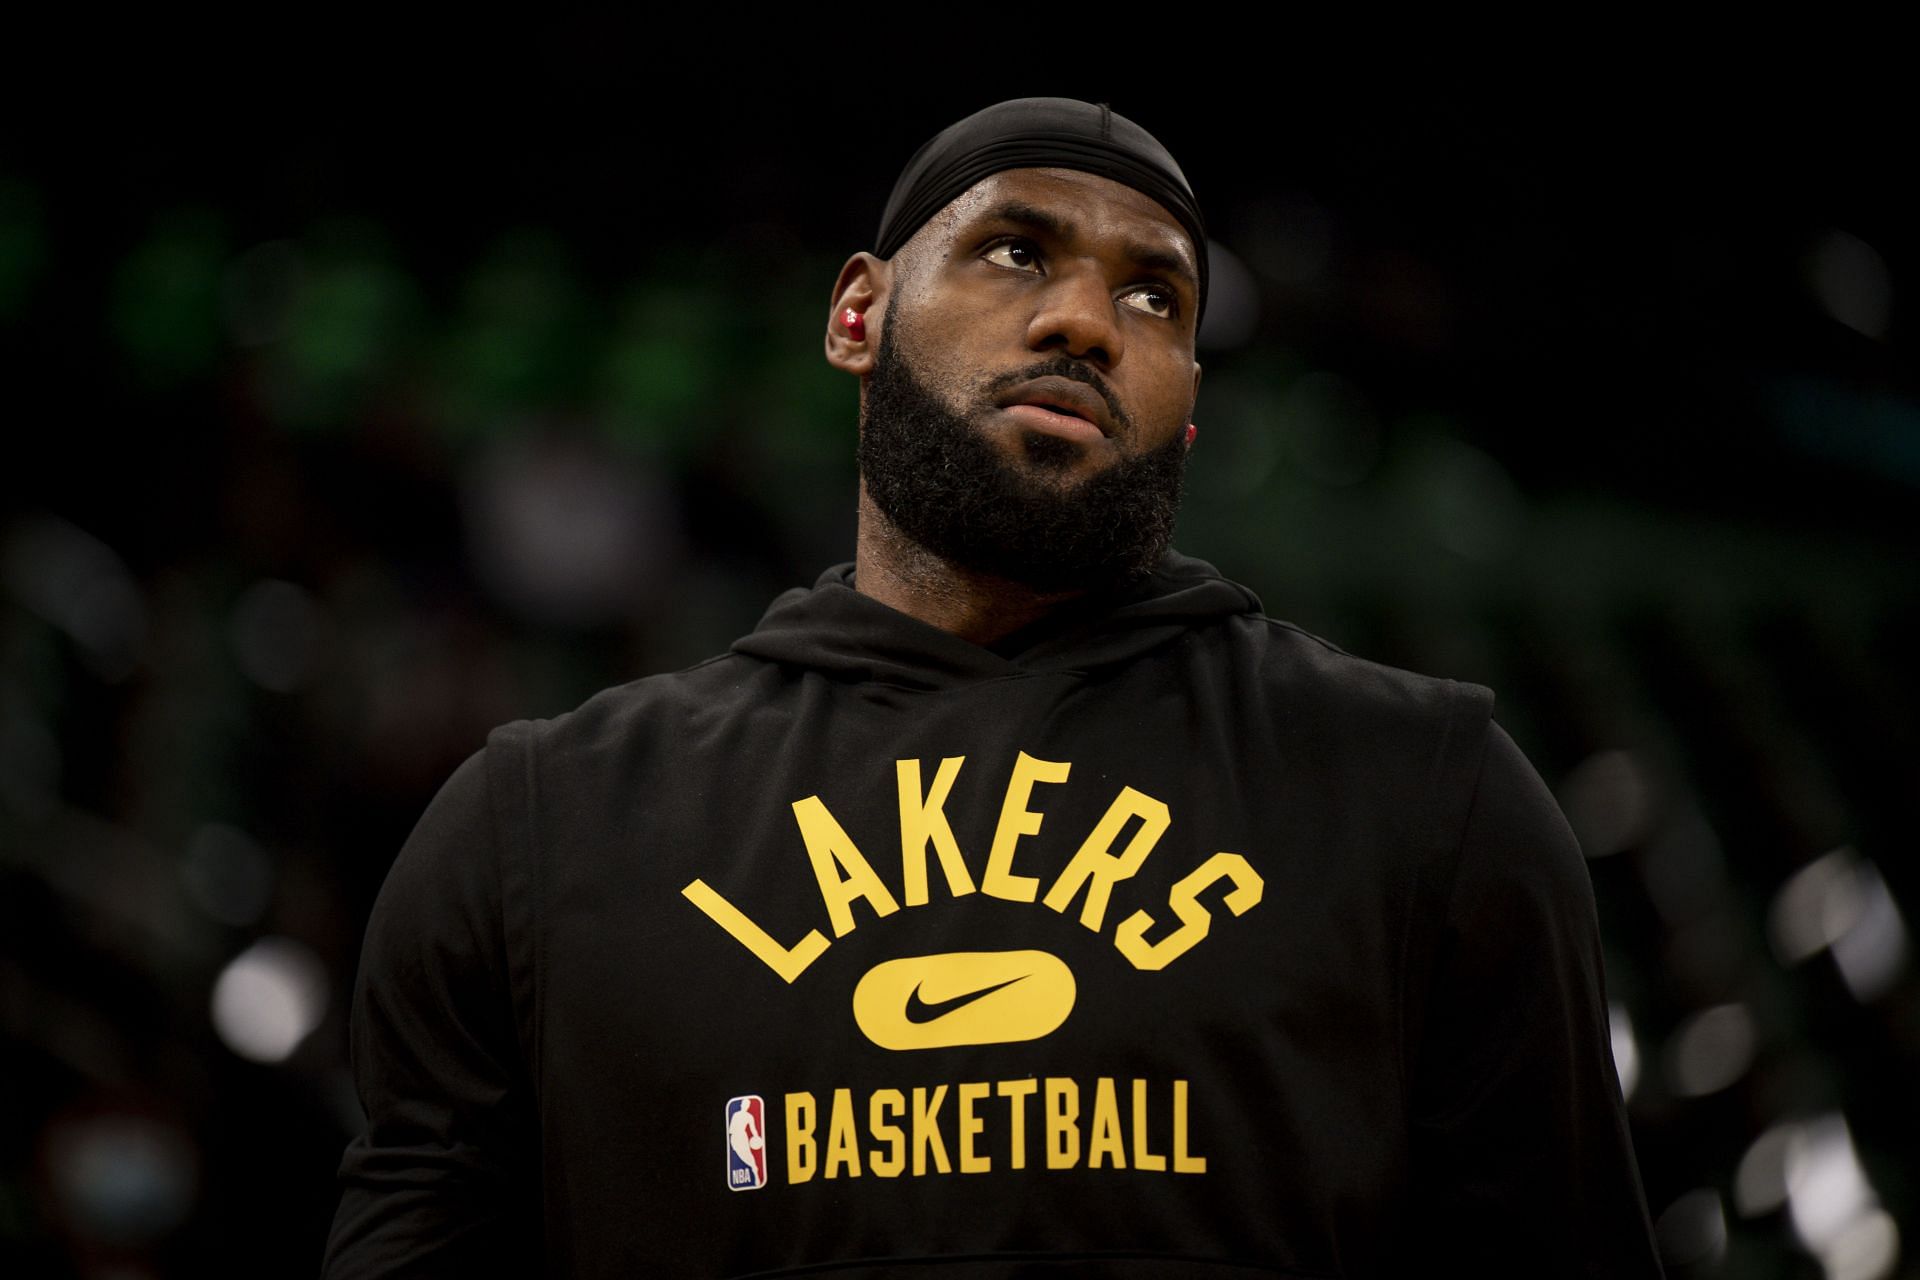 Superstar forward LeBron James of the Los Angeles Lakers.